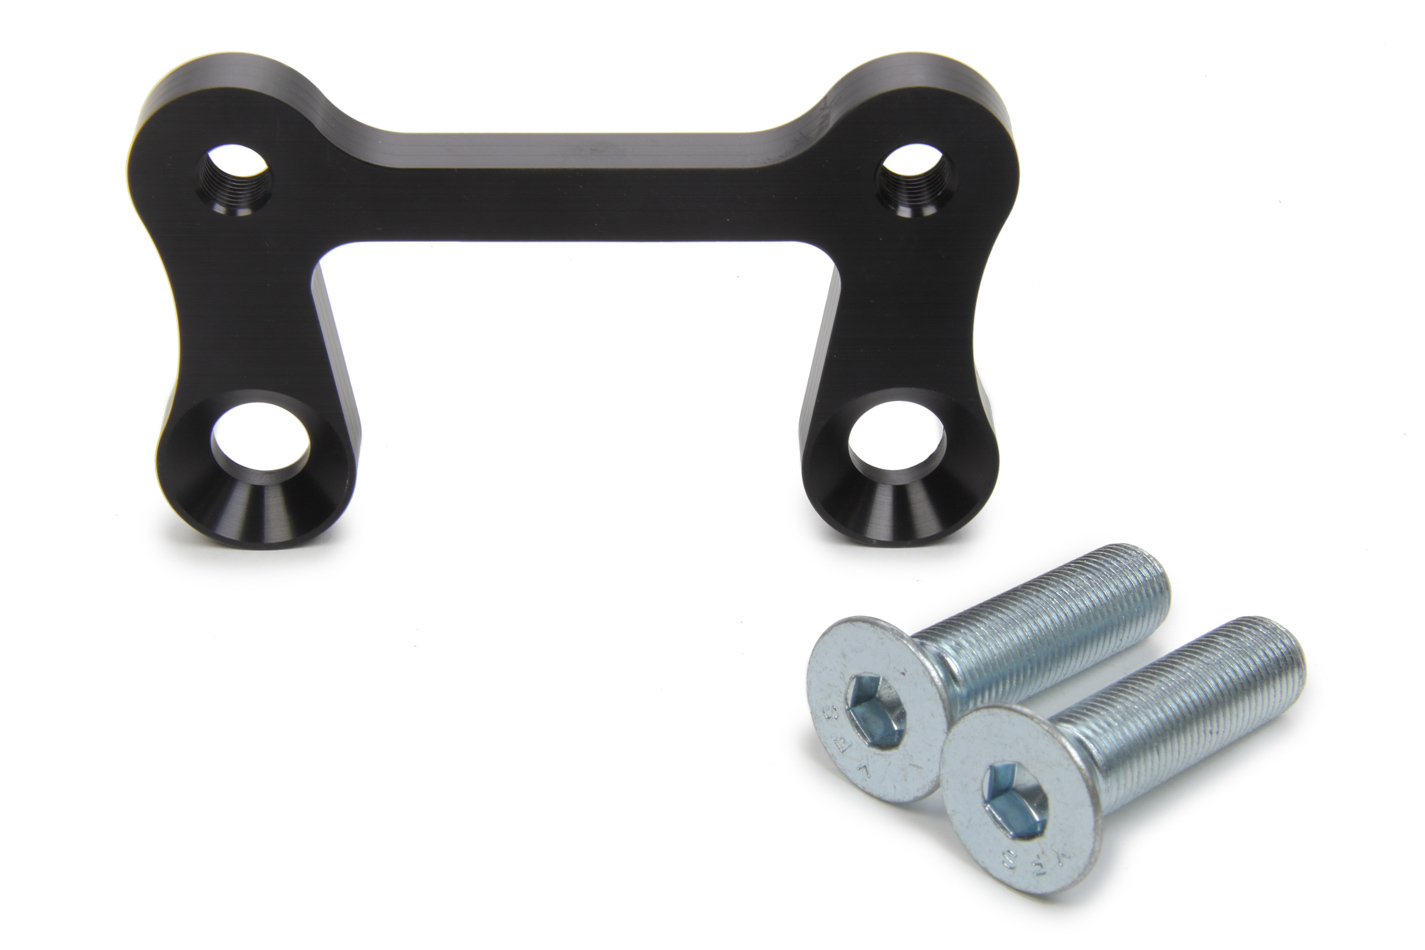 Triple X Race Components SC-FE-0011-BLK Brake Caliper Bracket, Front, Aluminum, Black Anodized, 10-7/8 in Rotor, 3-1/4 in Lug Mount Calipers, Sprint Car Spindles, Each